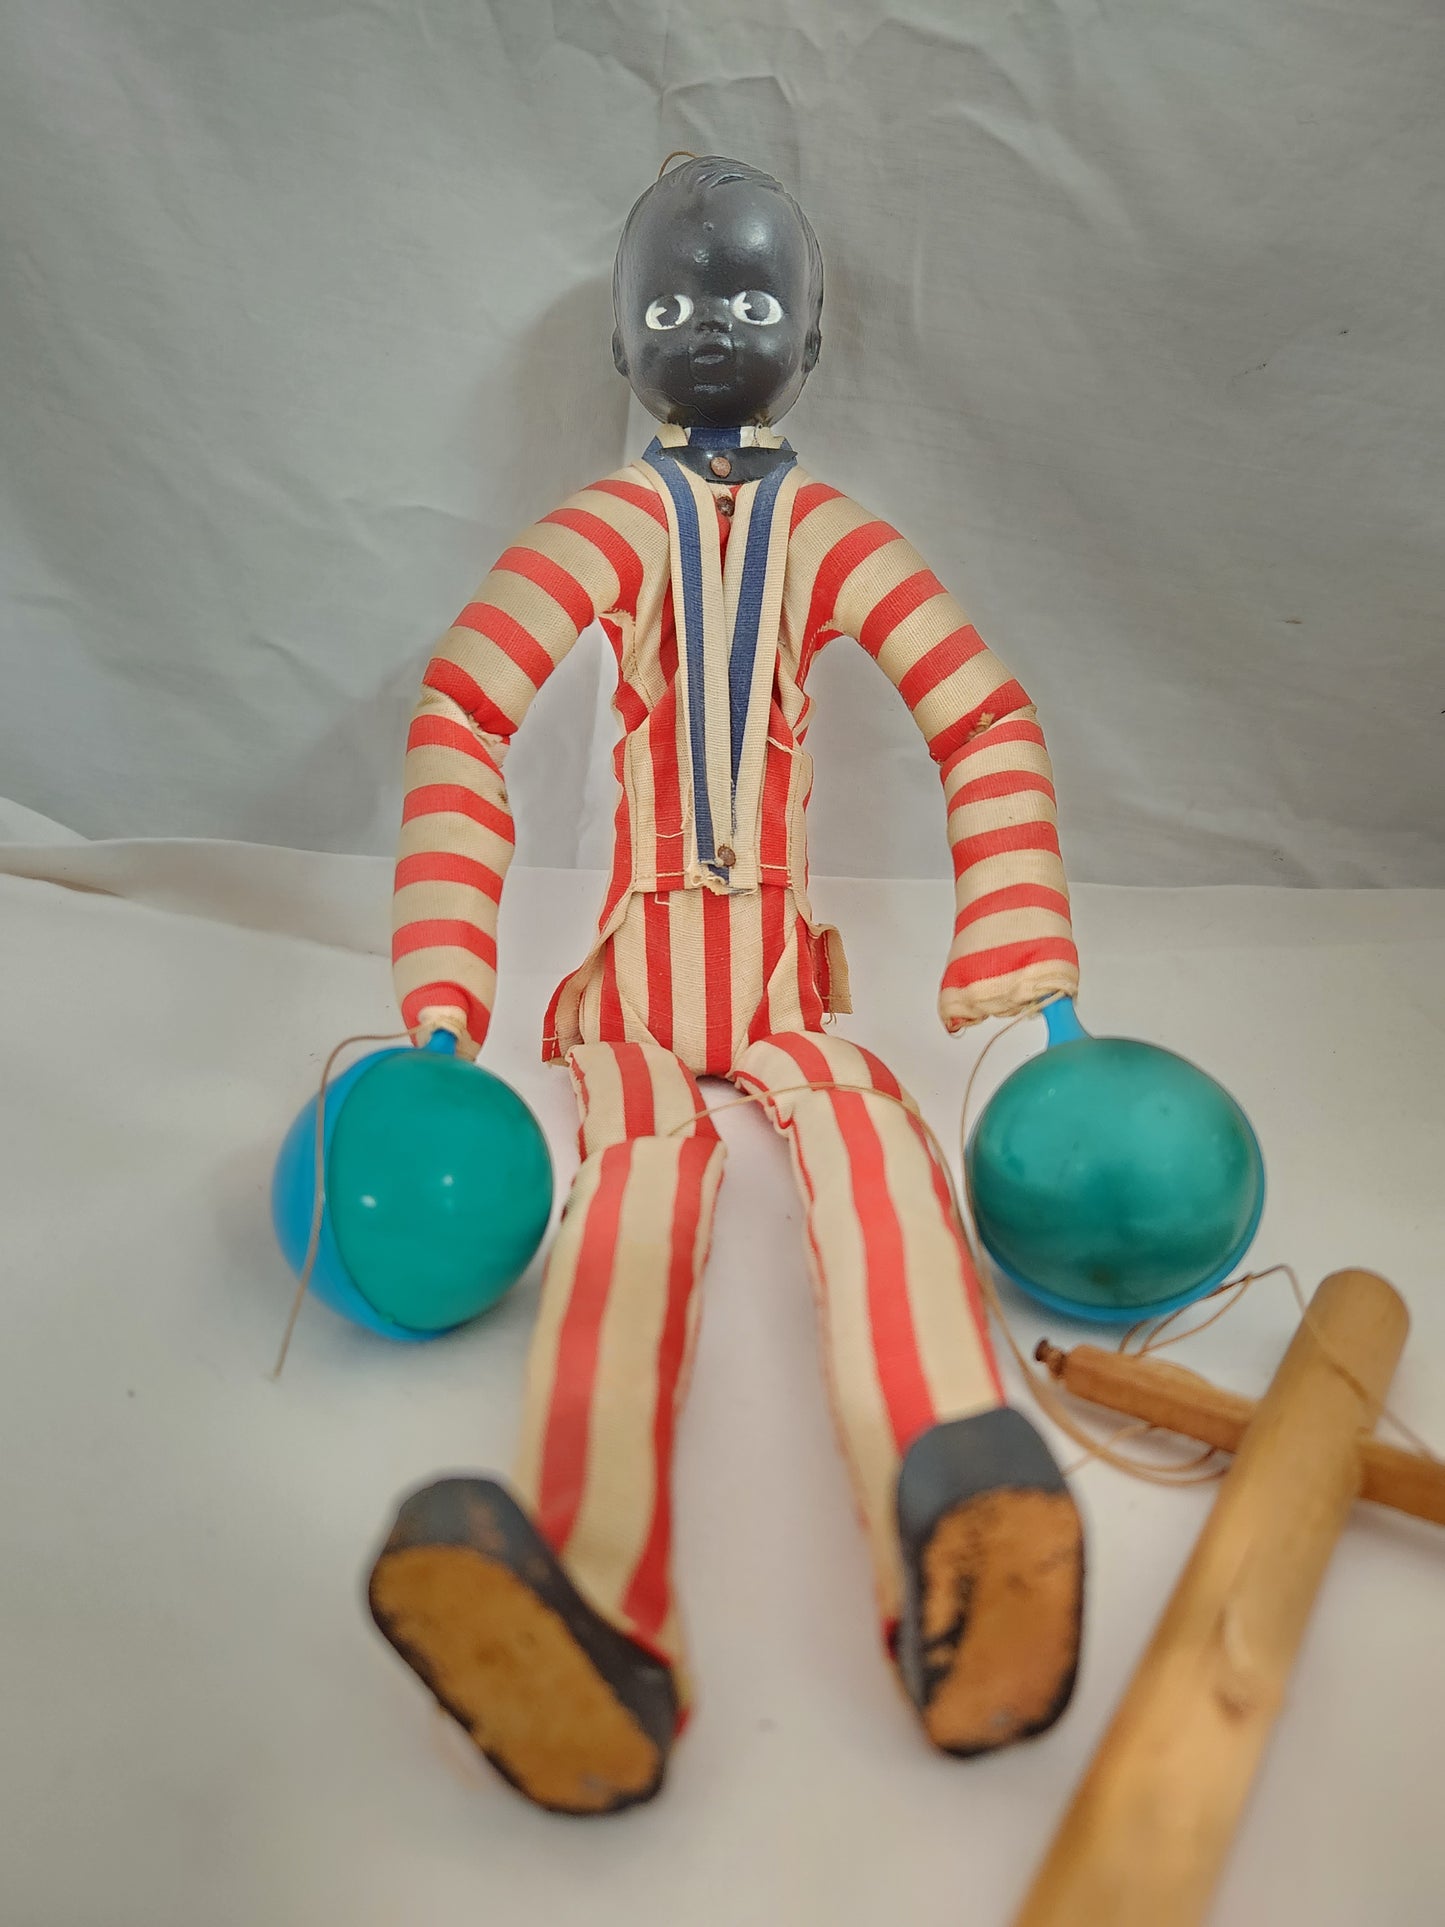 VTG - Pair of Marching African American Renascenca Marionette Puppets